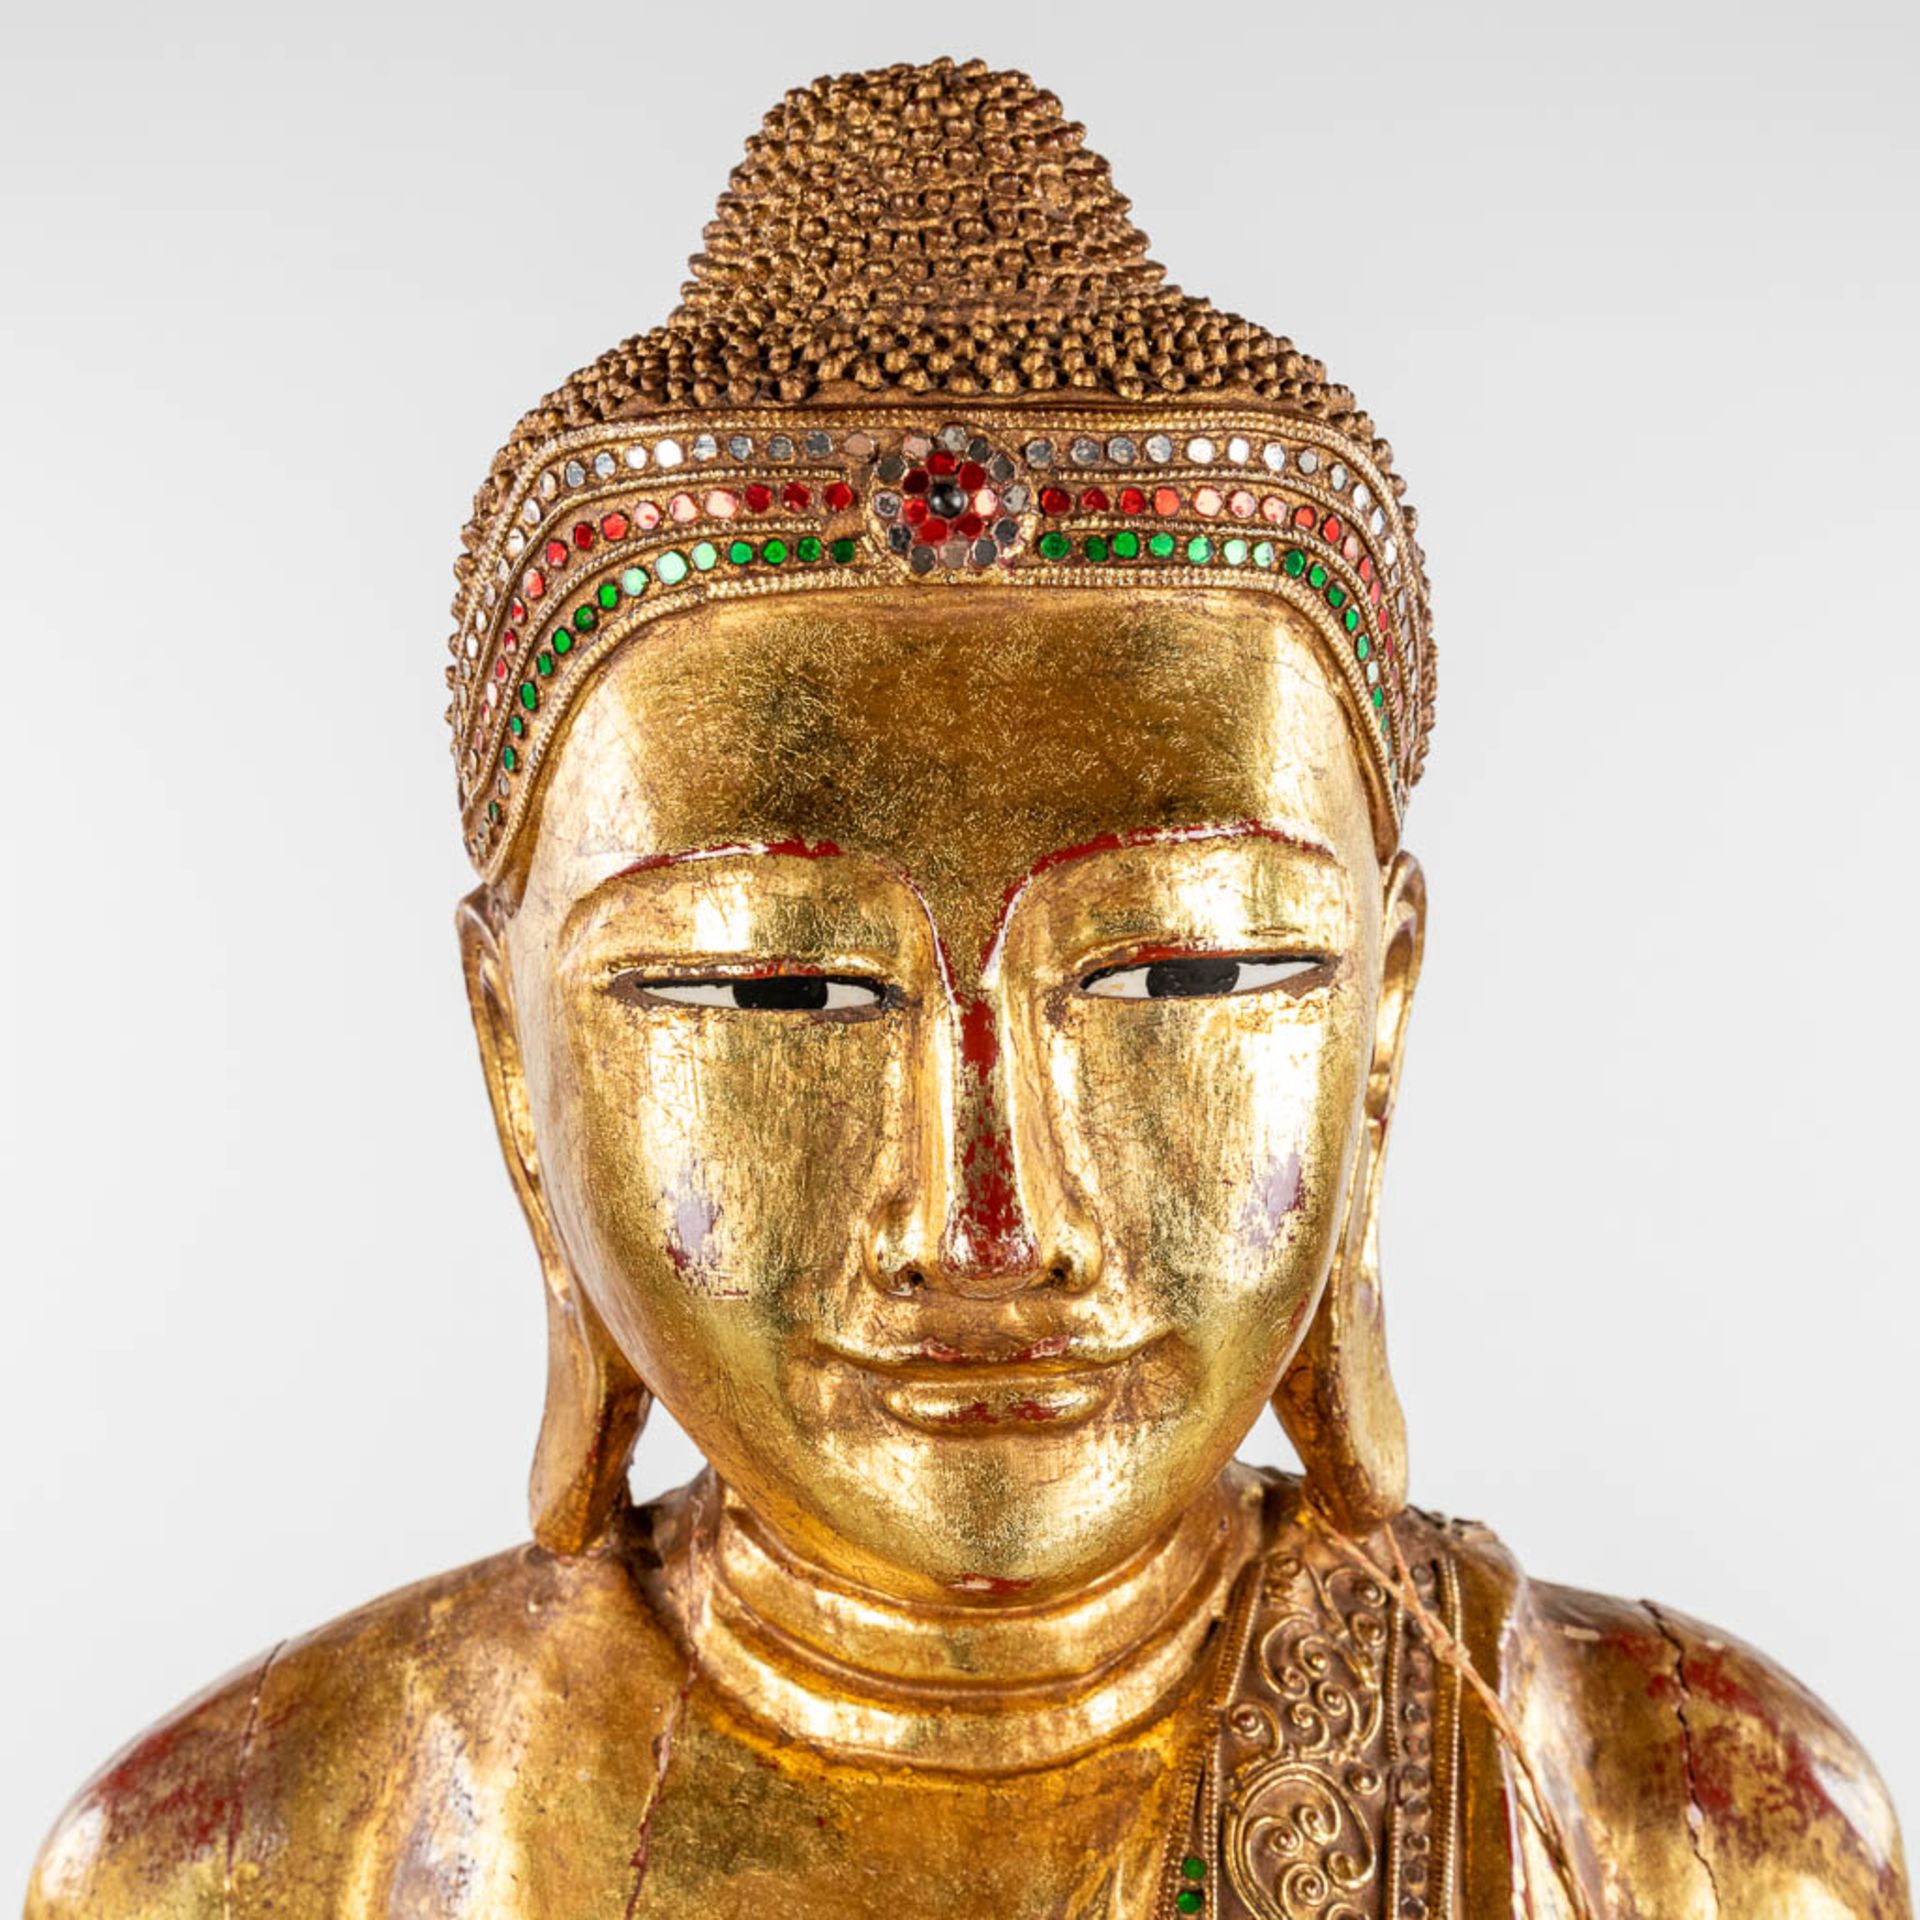 A large and decorative wood sculptured figurine of Buddha, 20th C. (D:30 x W:67 x H:164 cm) - Image 8 of 15